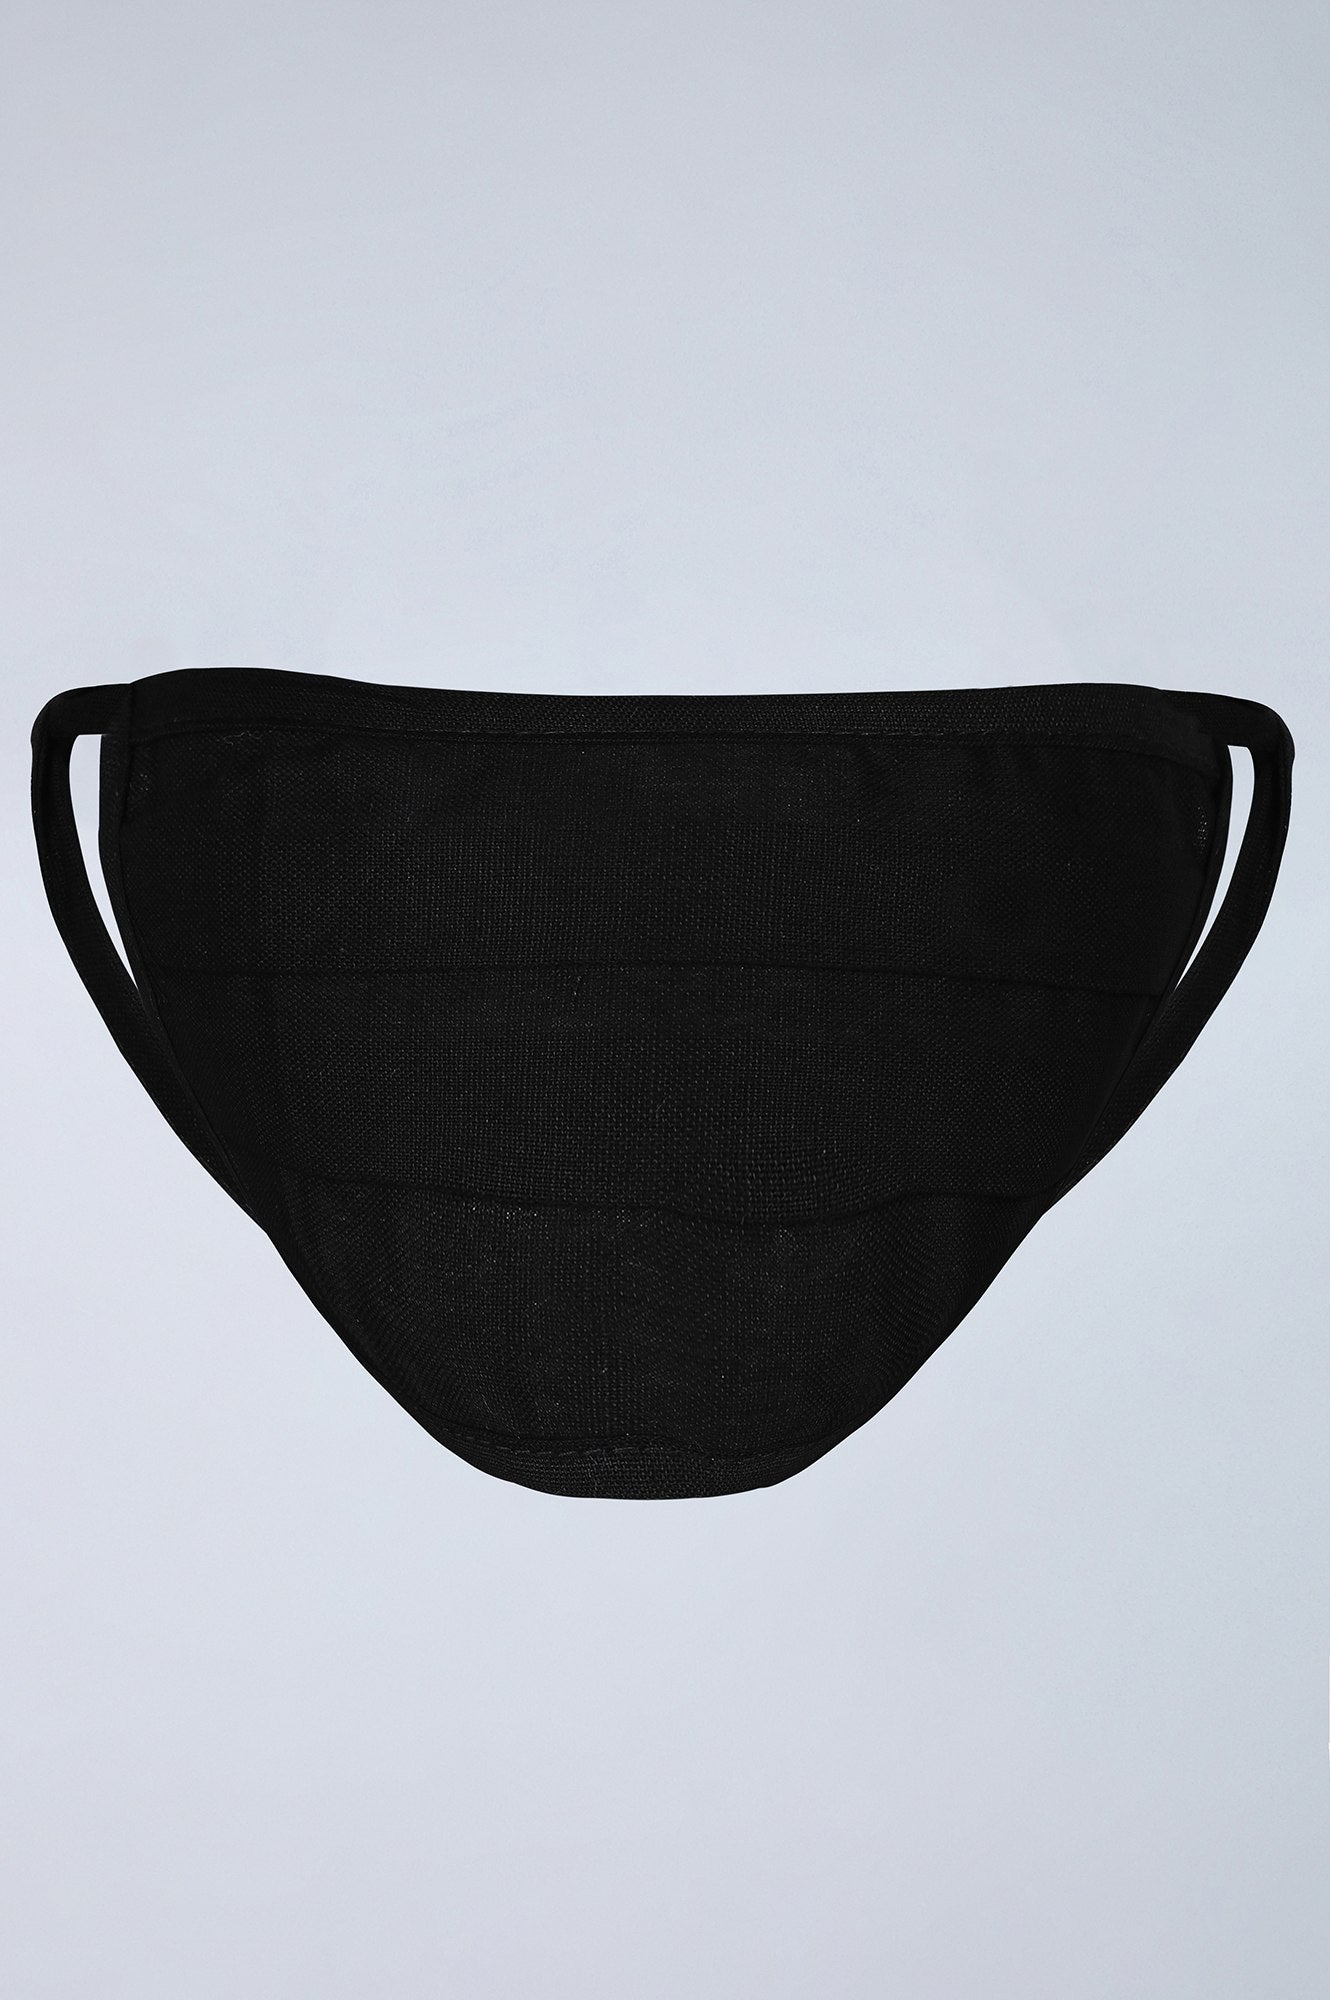 Black Reusable Cotton Face Mask - Pack of 3